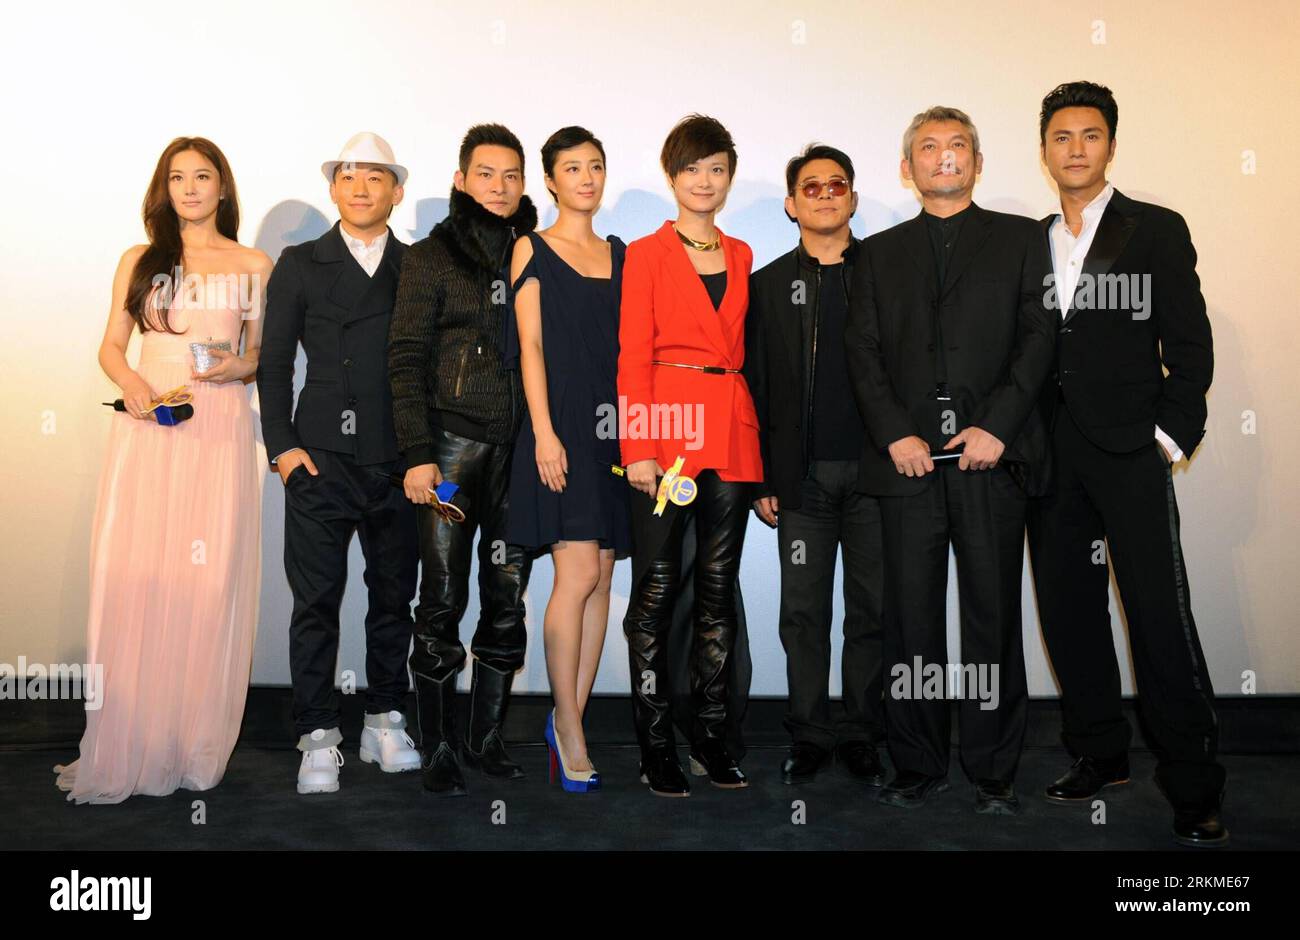 Bildnummer: 56691843  Datum: 12.12.2011  Copyright: imago/Xinhua (111213) -- BEIJING, Dec. 13, 2011 (Xinhua) -- Director Tsui Hark (2nd R), kungfu star Jet Li (3rd R) and other cast members of the action movie Flying Swords of Dragon Gate pose for photo during the premiere of the 3D kungfu epic in Beijing, capital of China, Dec. 12, 2011. (Xinhua/Li Jundong) (mp) CHINA-BEIJING-- FLYING SWORDS OF DRAGON GATE -PREMIERE (CN) PUBLICATIONxNOTxINxCHN People Entertainment Kultur Film Filmpremiere xbs x2x 2011 quer  premiumd     56691843 Date 12 12 2011 Copyright Imago XINHUA  Beijing DEC 13 2011 XINH Stock Photo